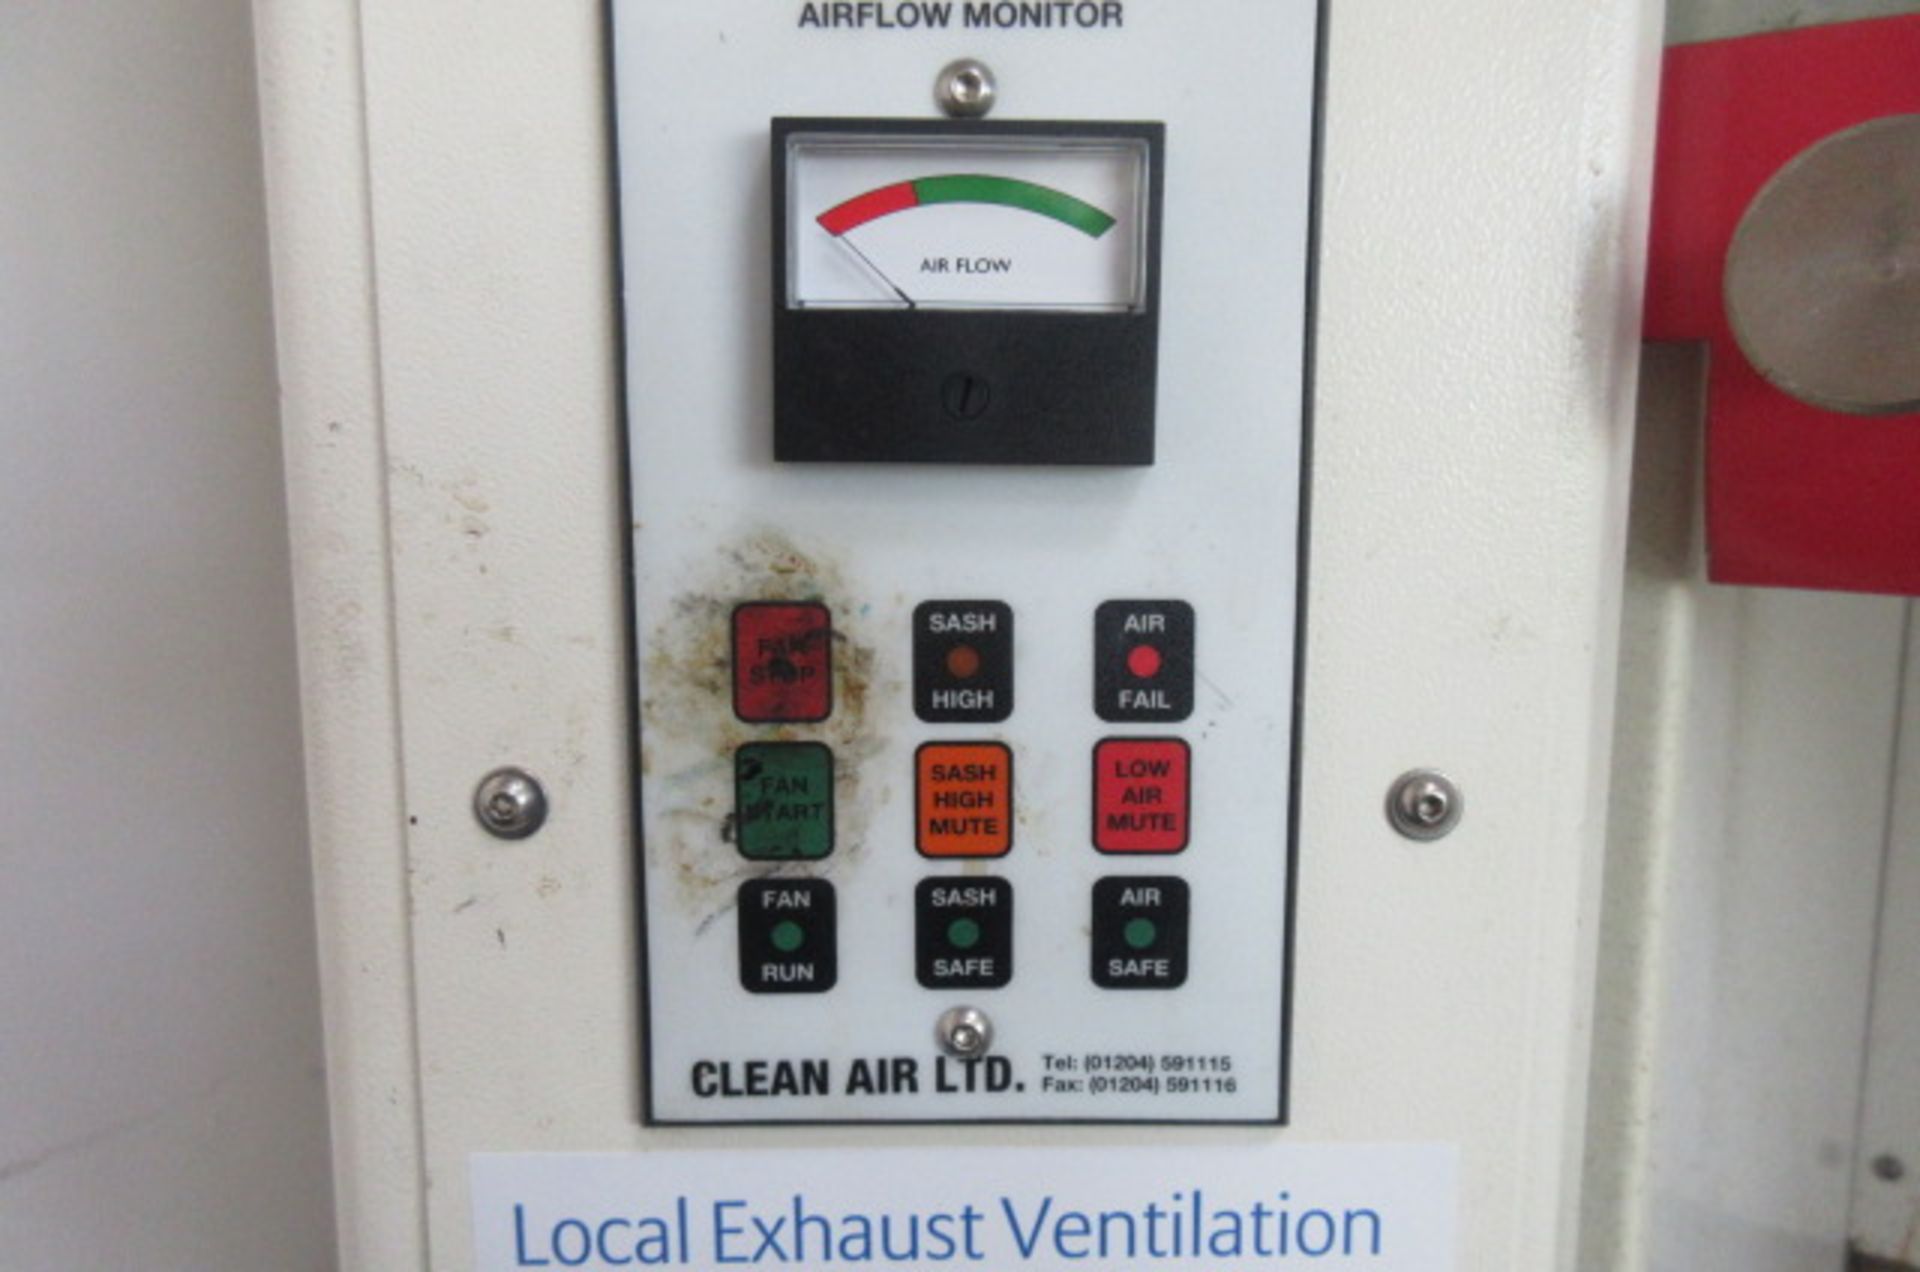 Clean Air ltd fume extraction cabinet - Image 2 of 3